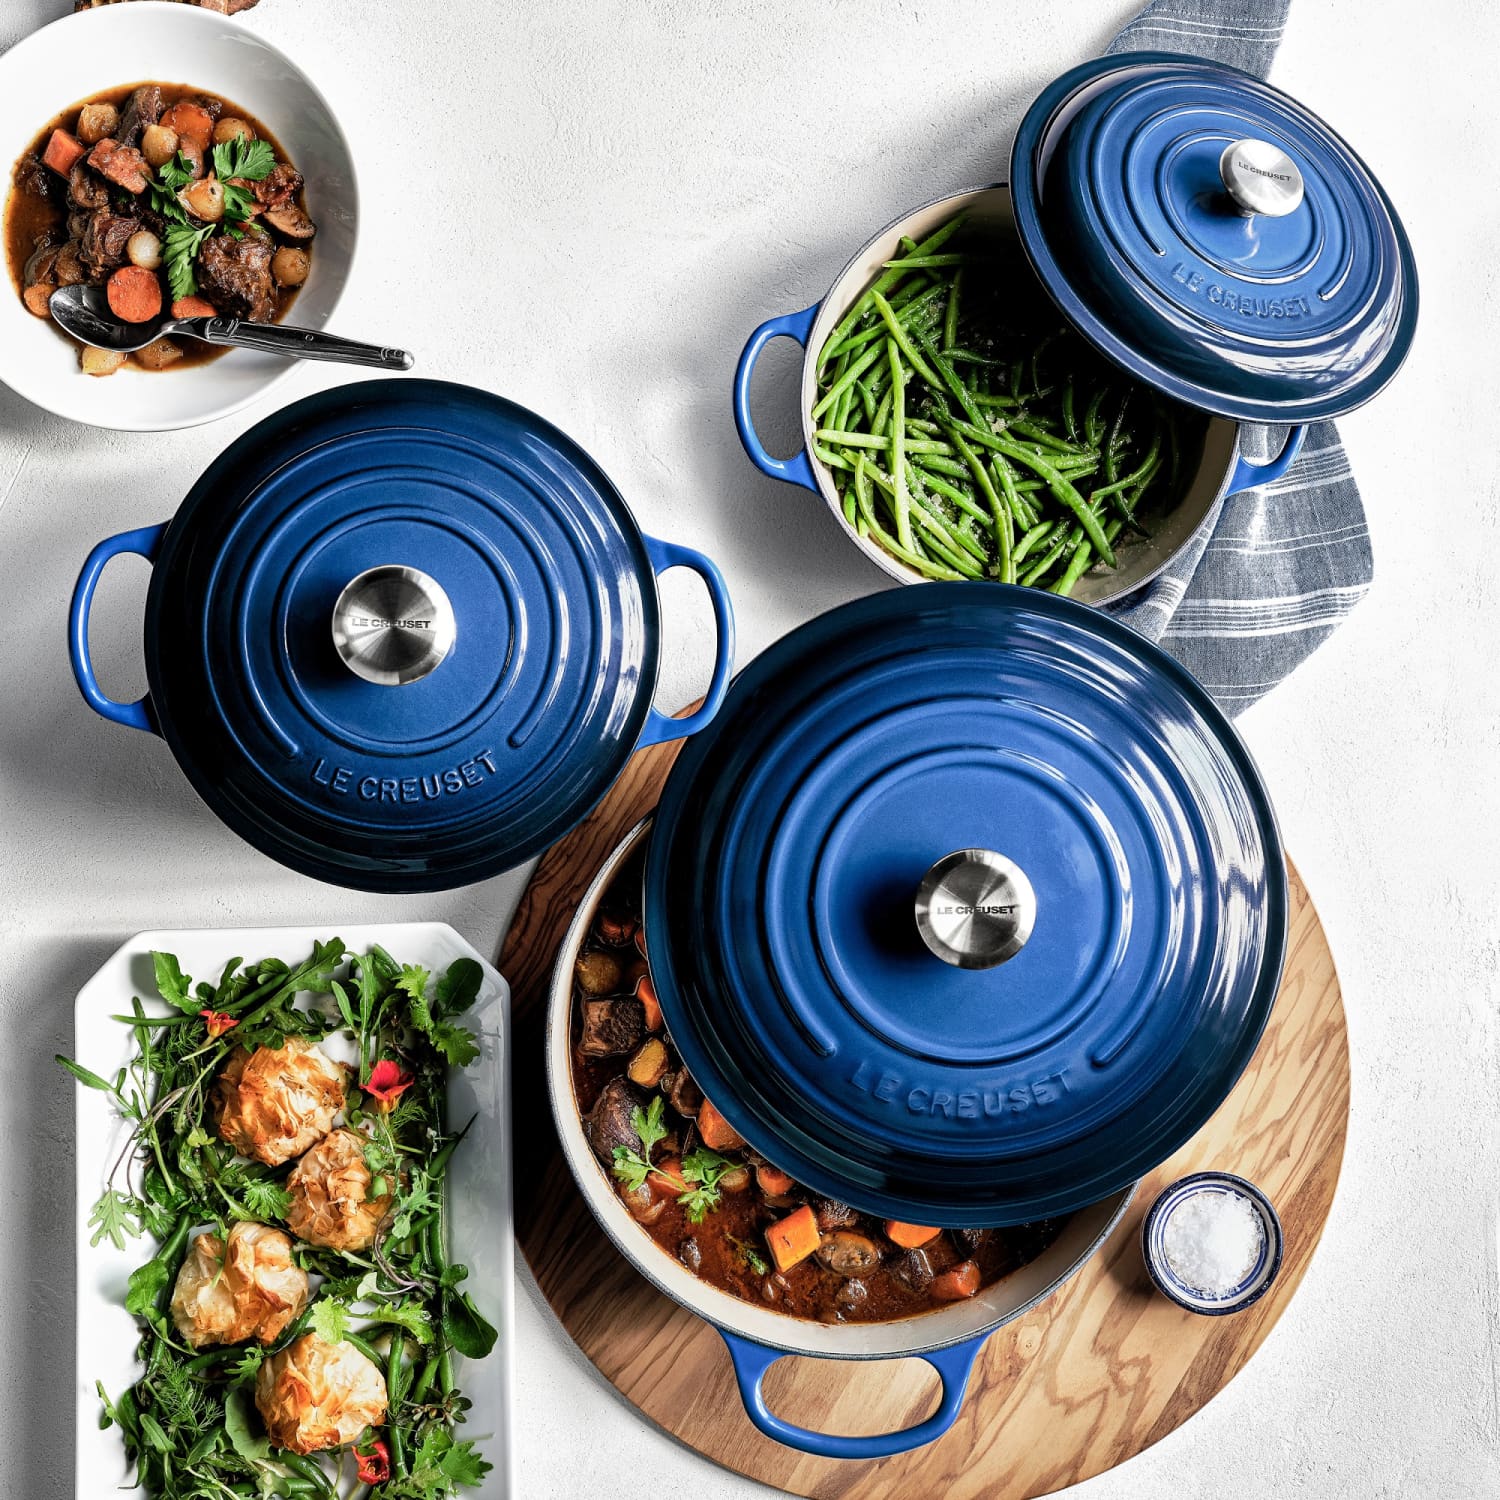 https://cdn.apartmenttherapy.info/image/upload/f_jpg,q_auto:eco,c_fill,g_auto,w_1500,ar_1:1/commerce%2Fle-creuset-enameled-cast-iron-signature-french-oven